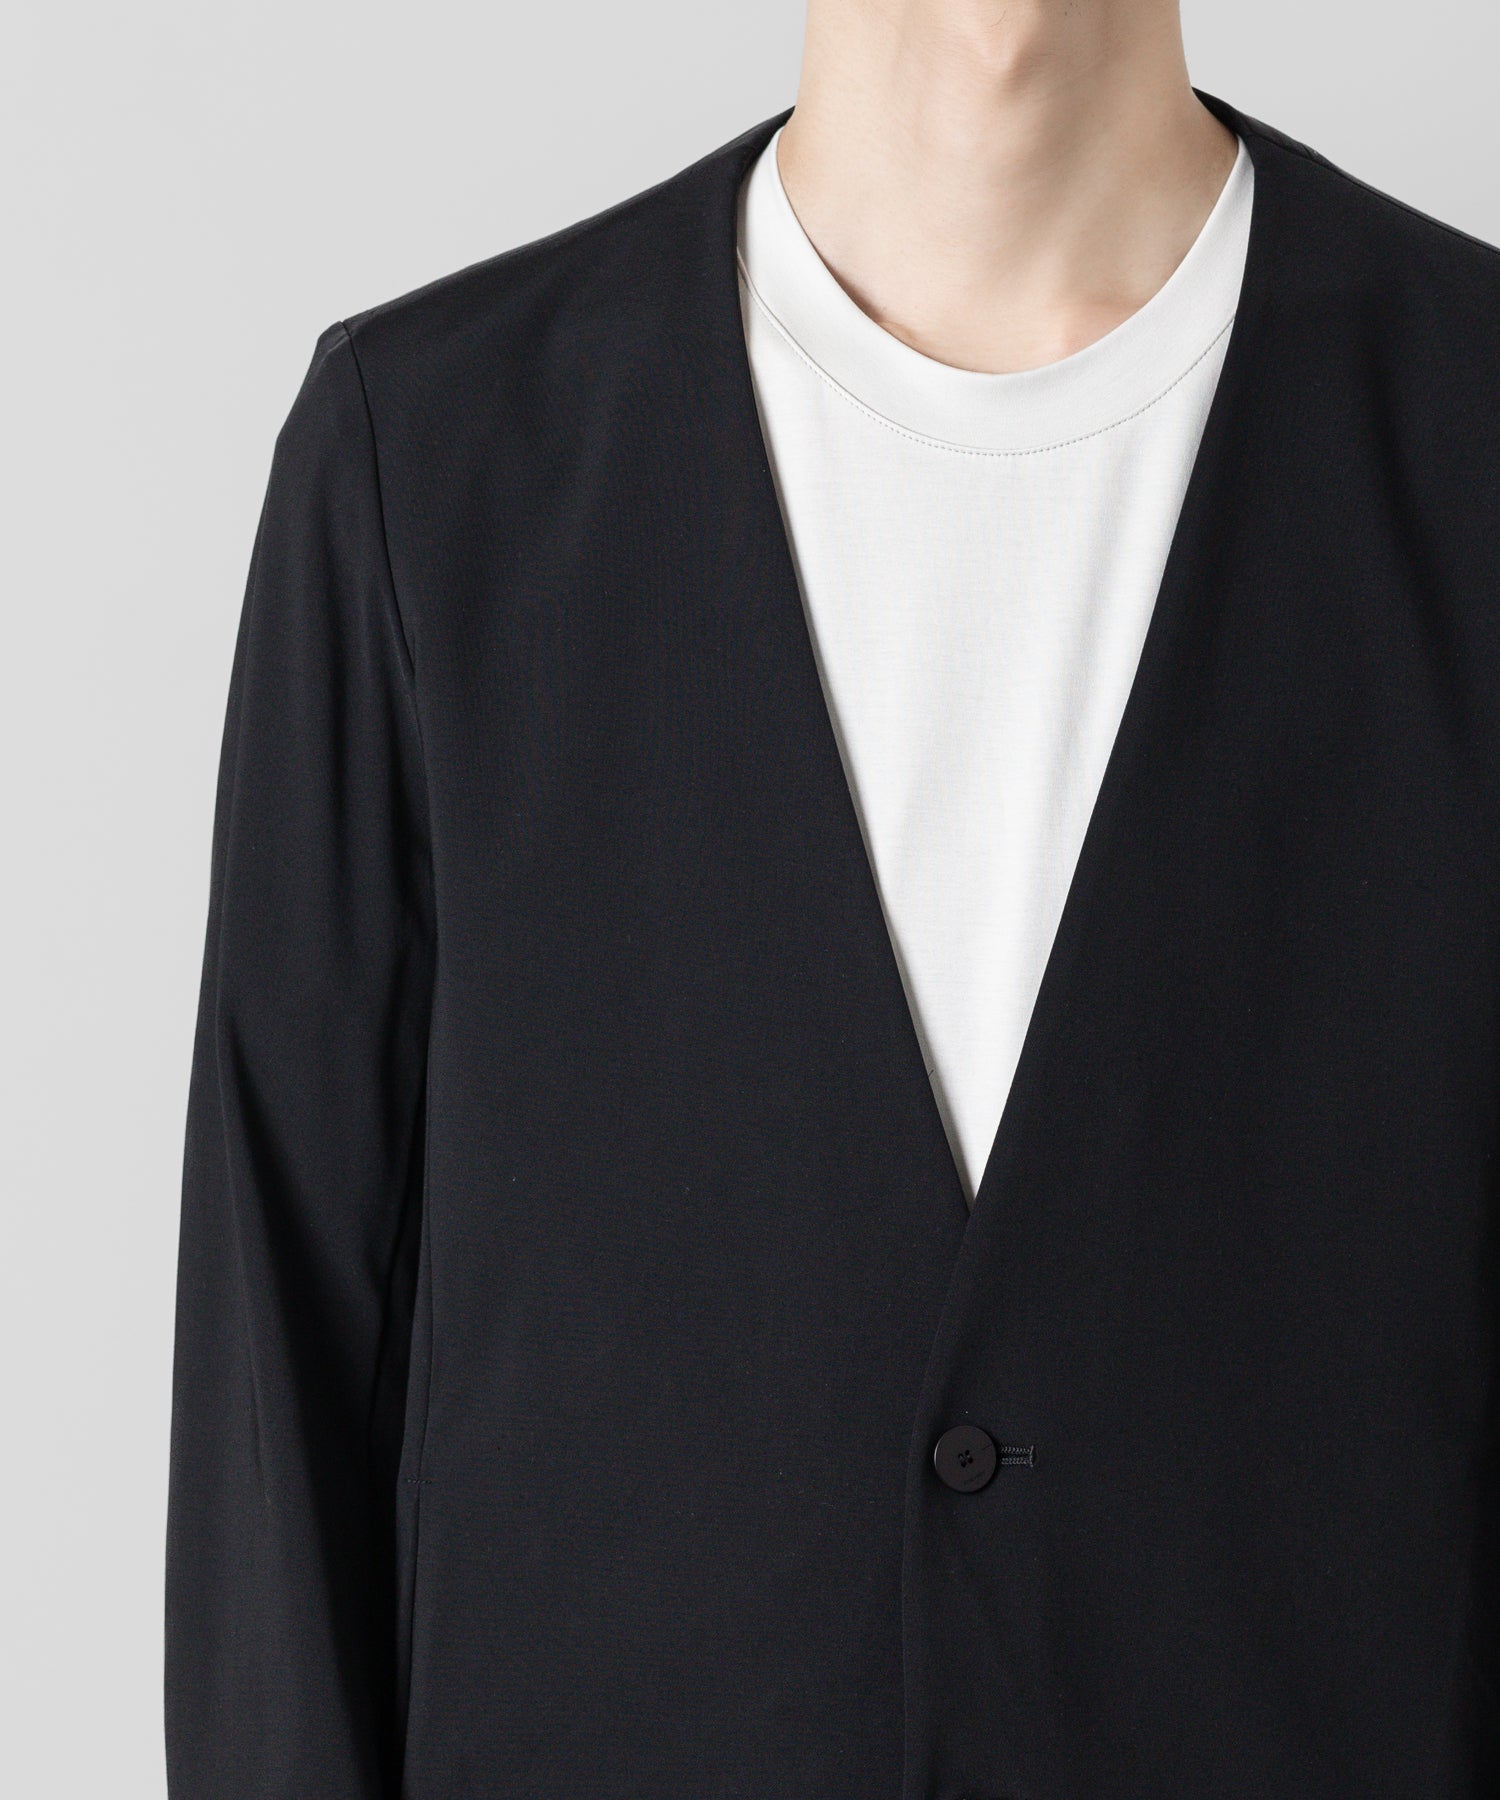 【ATTACHMENT】ATTACHMENT アタッチメントのNY/CO STRETCH JERSEY COLLARLESS JACKET - BLACK 公式通販サイトsession福岡セレクトショップ